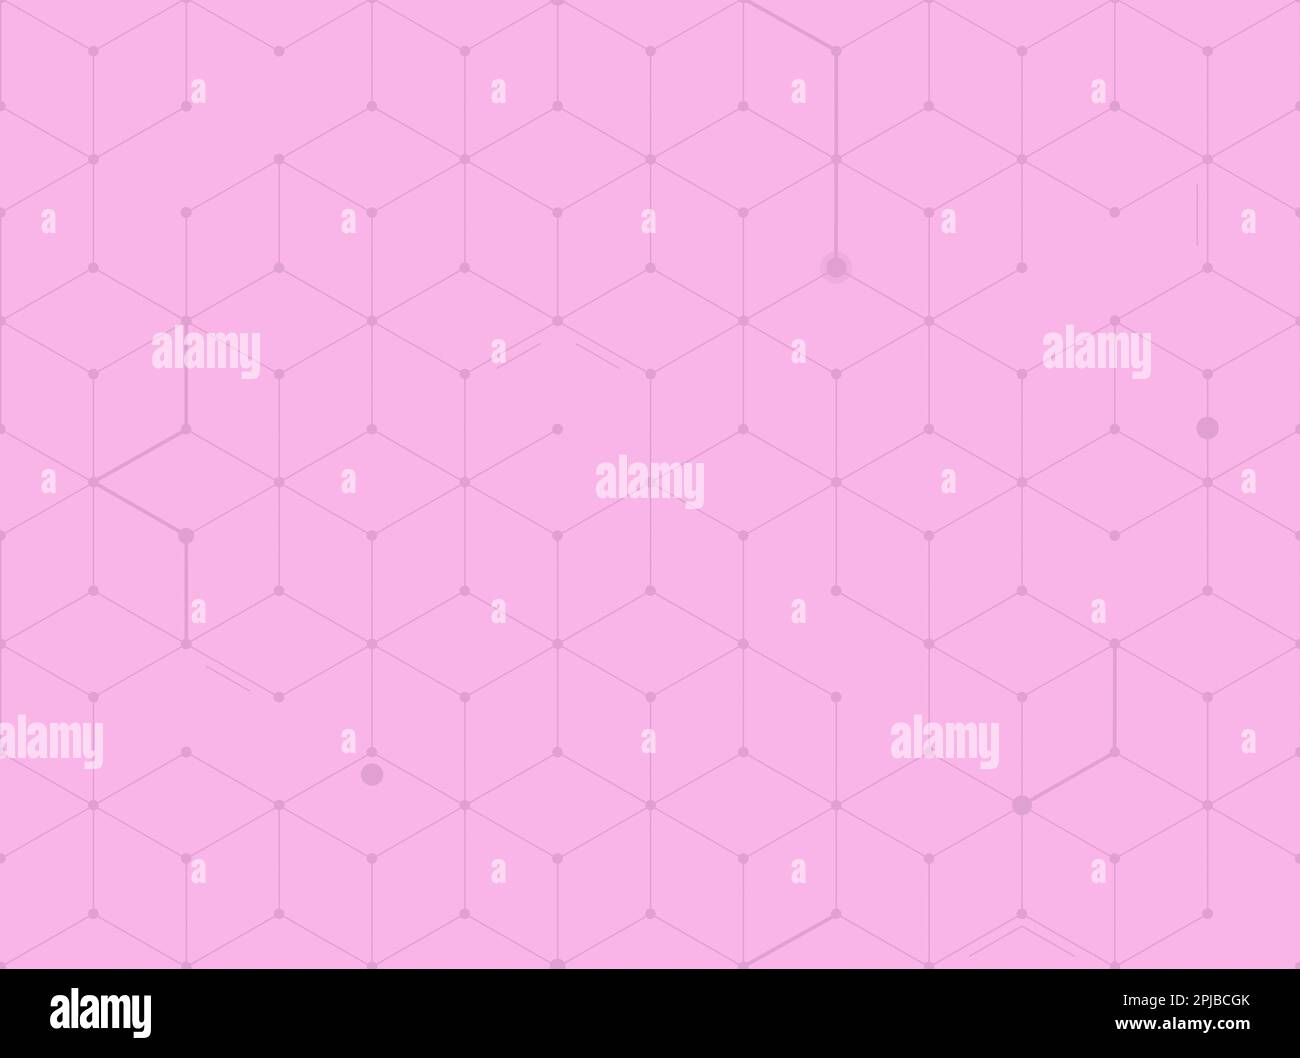 Purple 3d cubes on pink background, seamless geometric pattern. Abstract and modern technology background with repeating pattern. Stock Photo